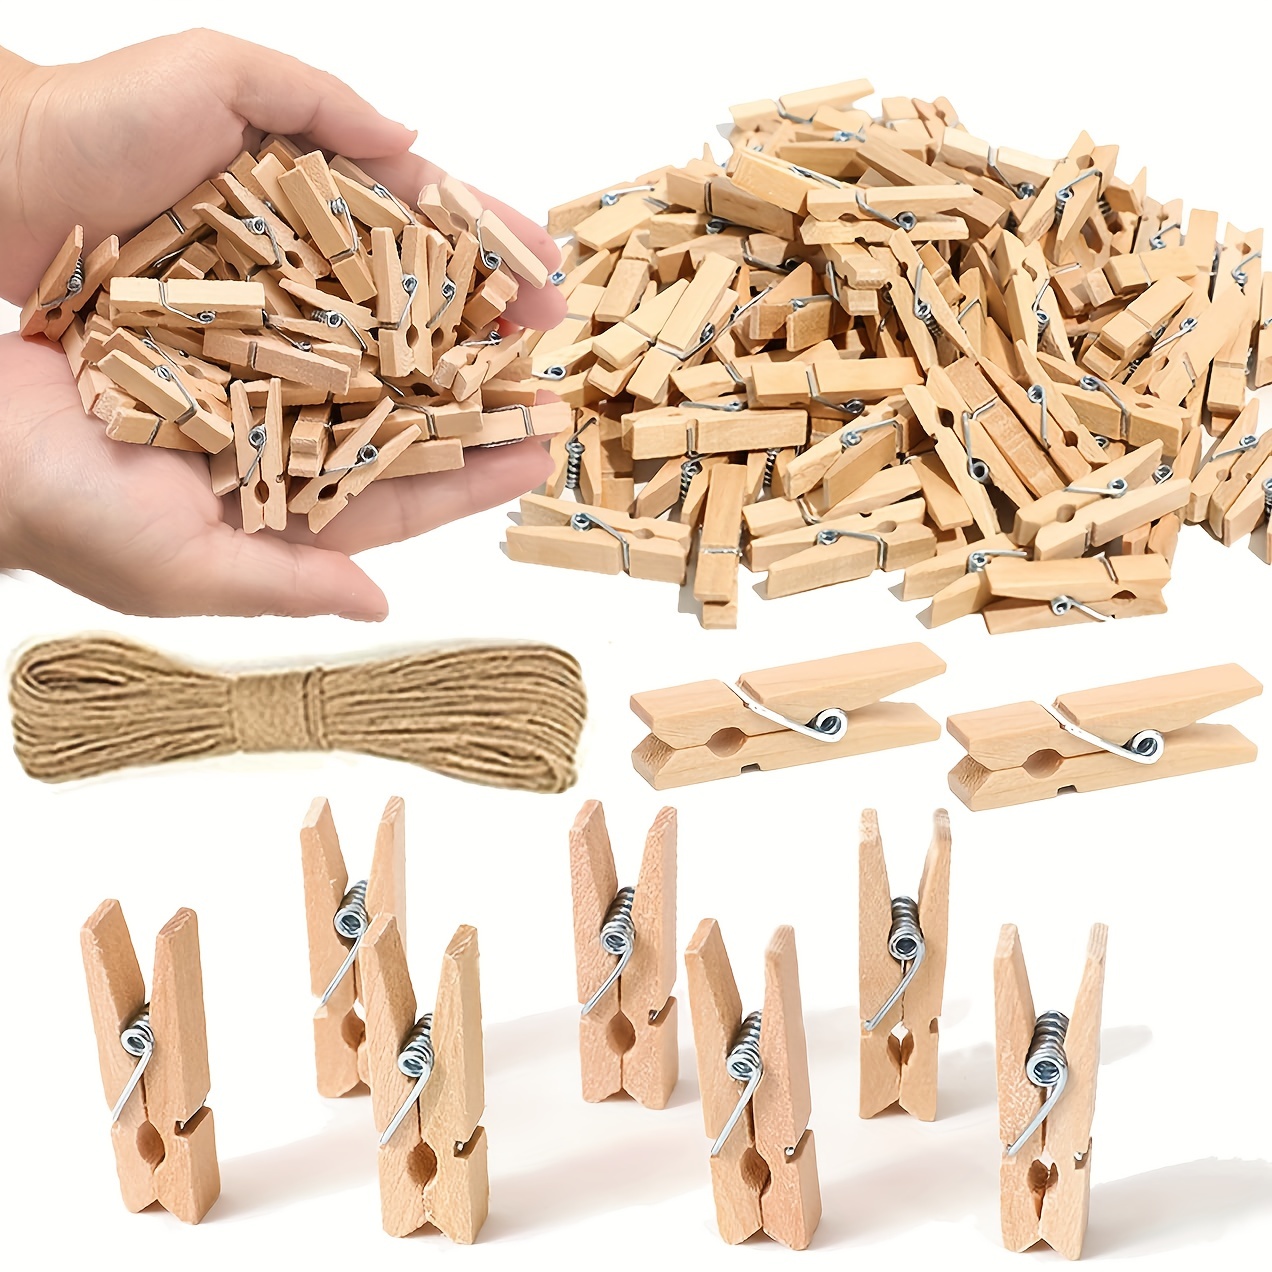 aHeemo Mini Clothespins, Mini Natural Wooden Clothespins with Jute Twine,  Multi-Function Clothespins Photo Paper Peg Pin Craft Clips (Natural 250 Pcs)